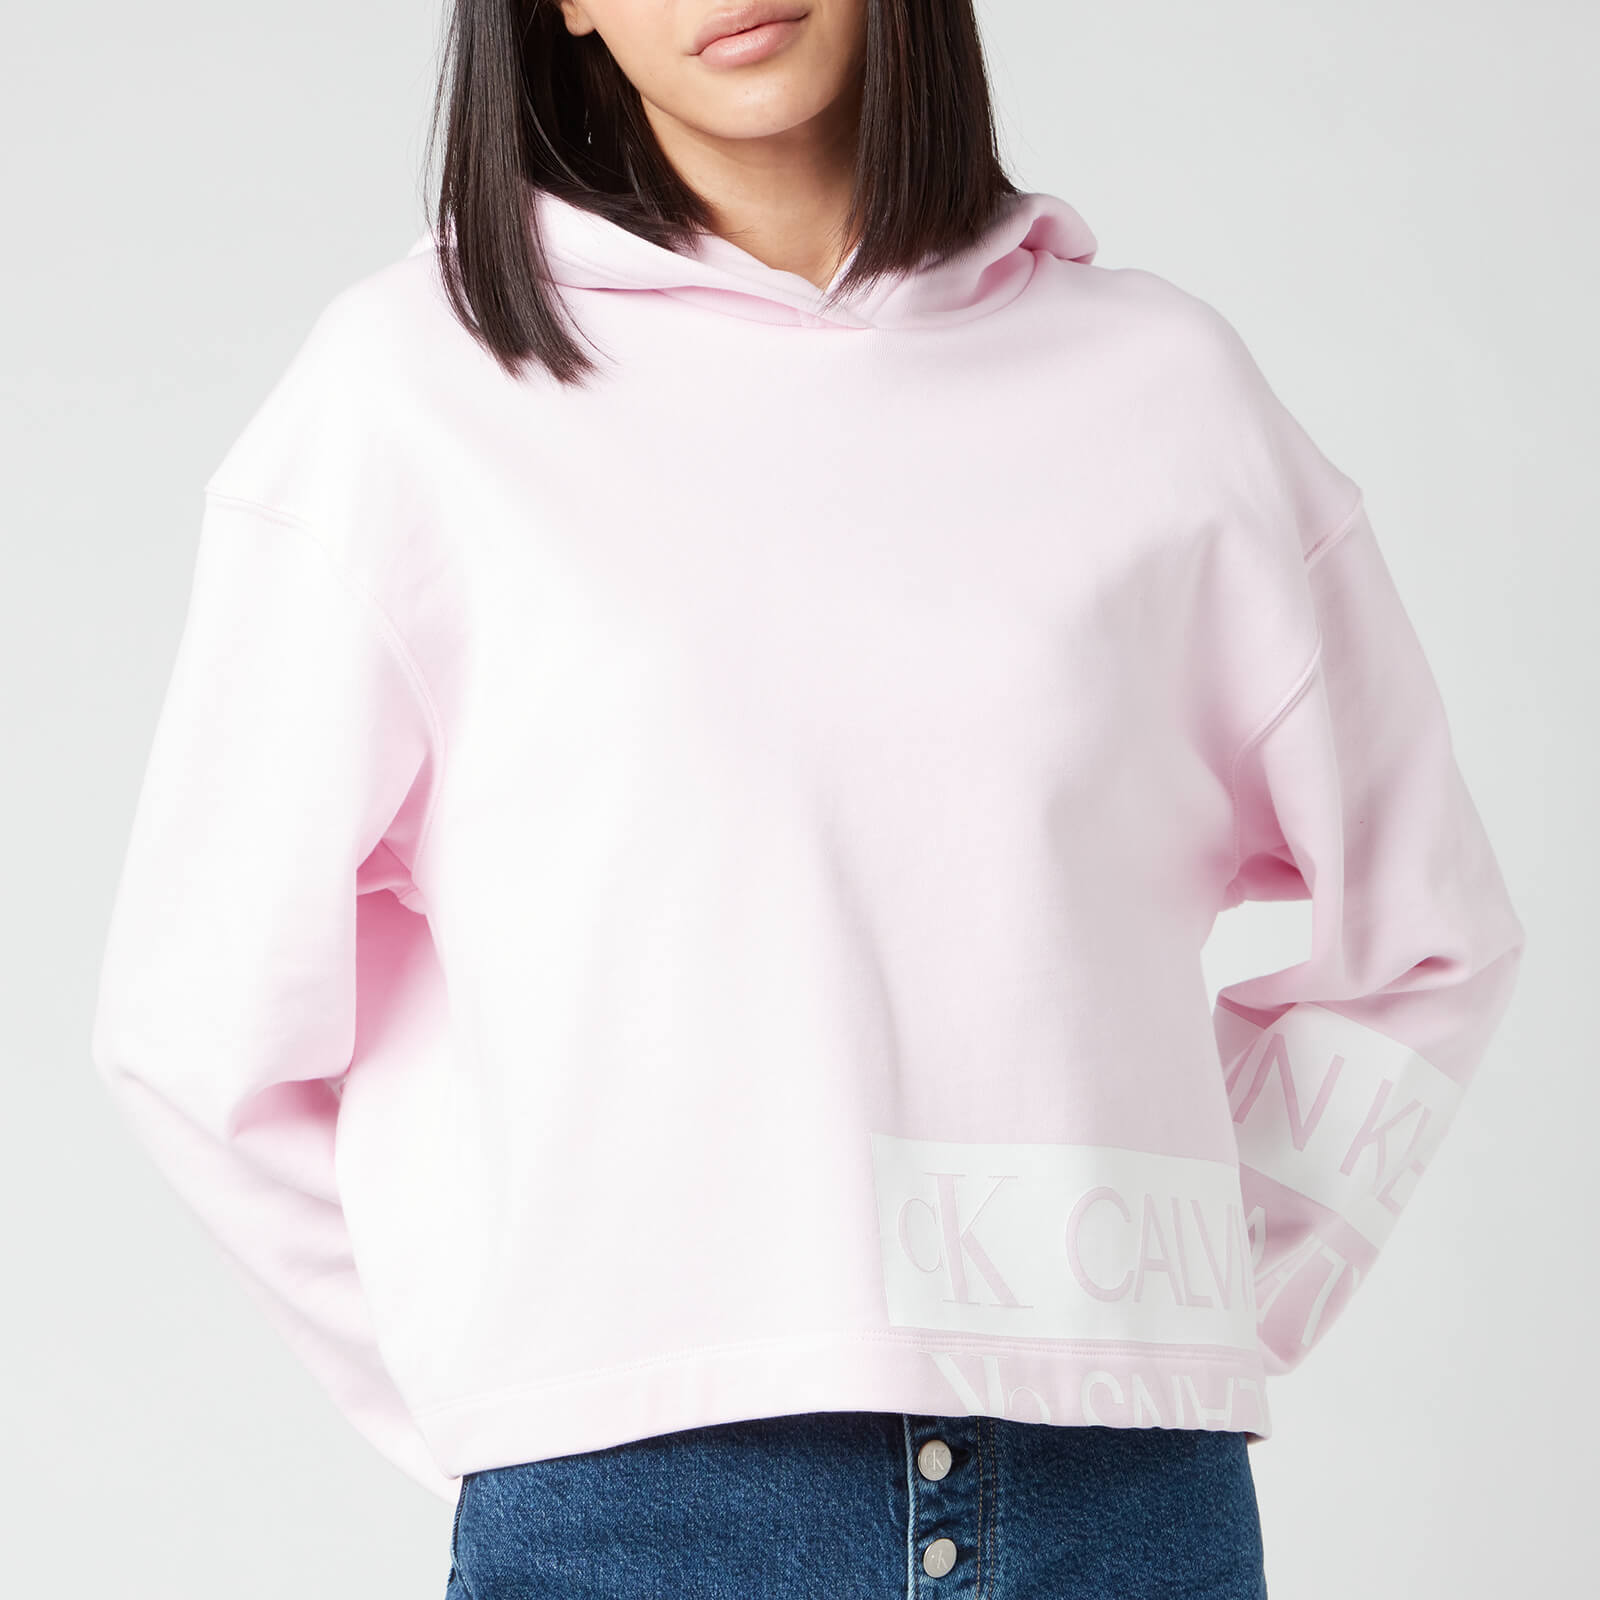 Calvin Klein Jeans Women's Mirrored Logo Hoodie - Pearly Pink - XS